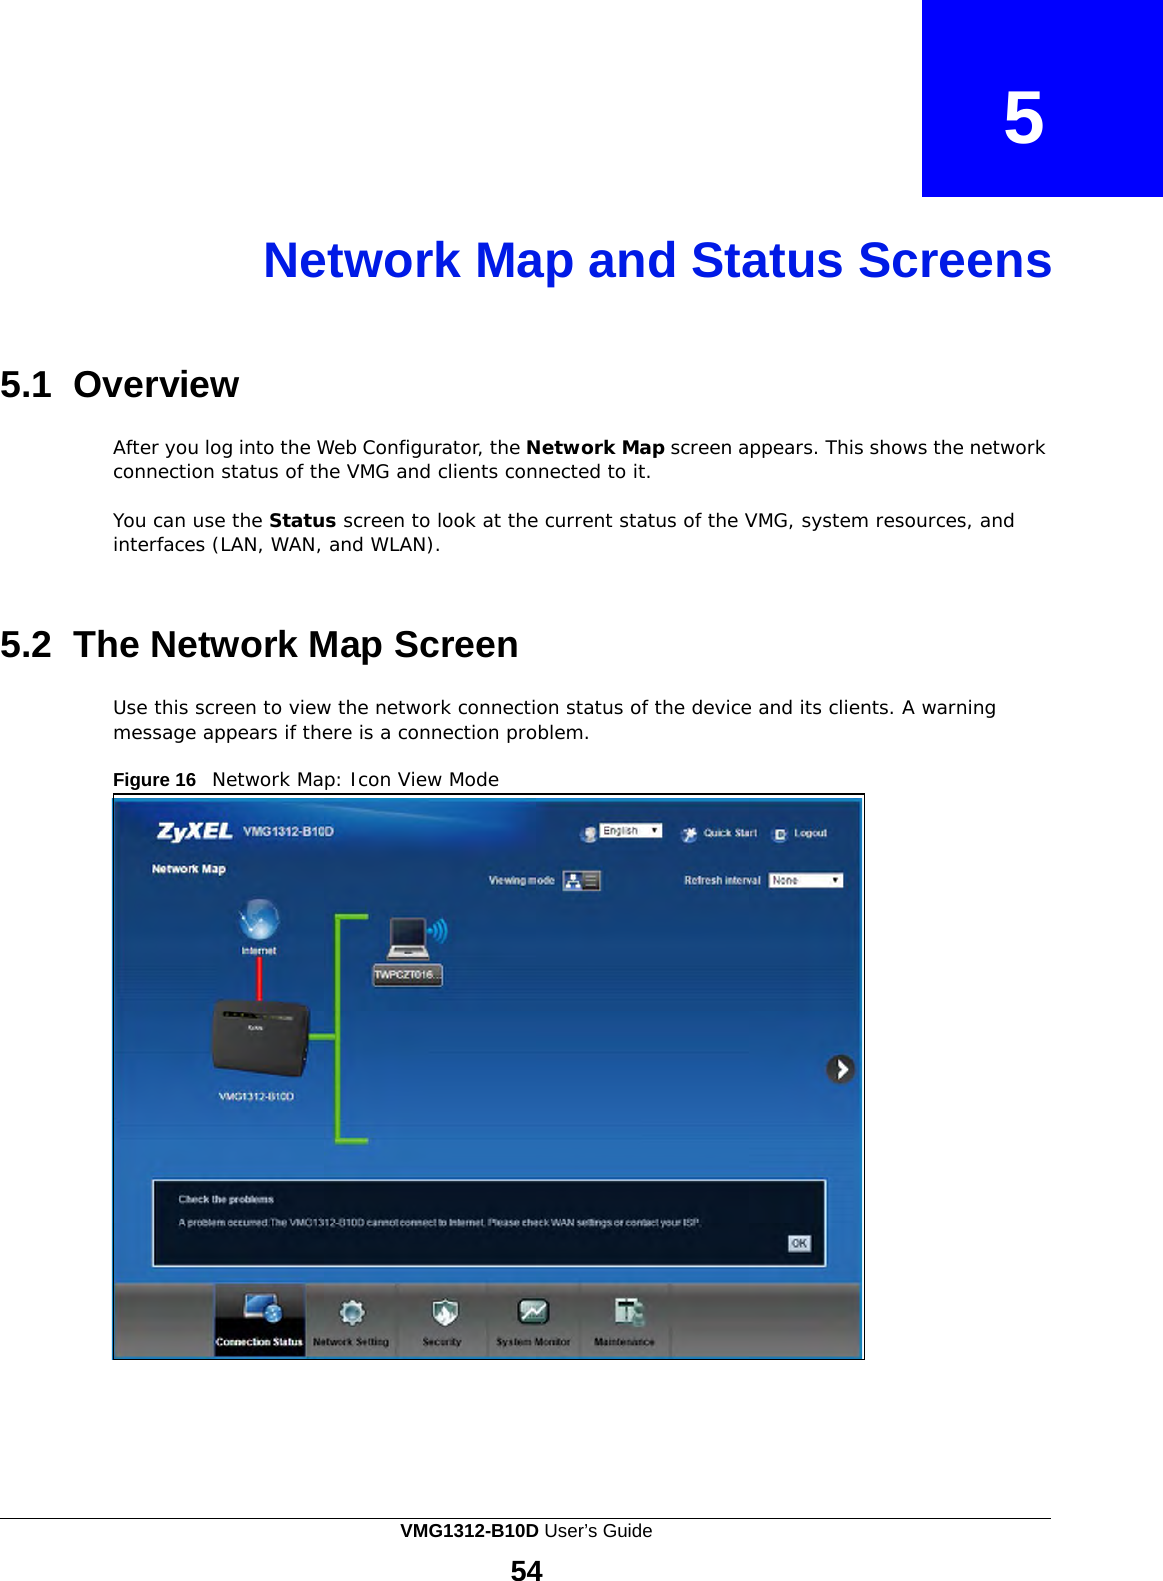    5    Network Map and Status Screens     5.1  Overview  After you log into the Web Configurator, the Network Map screen appears. This shows the network connection status of the VMG and clients connected to it.  You can use the Status screen to look at the current status of the VMG, system resources, and interfaces (LAN, WAN, and WLAN).    5.2  The Network Map Screen  Use this screen to view the network connection status of the device and its clients. A warning message appears if there is a connection problem.  Figure 16   Network Map: Icon View Mode VMG1312-B10D User’s Guide  54  